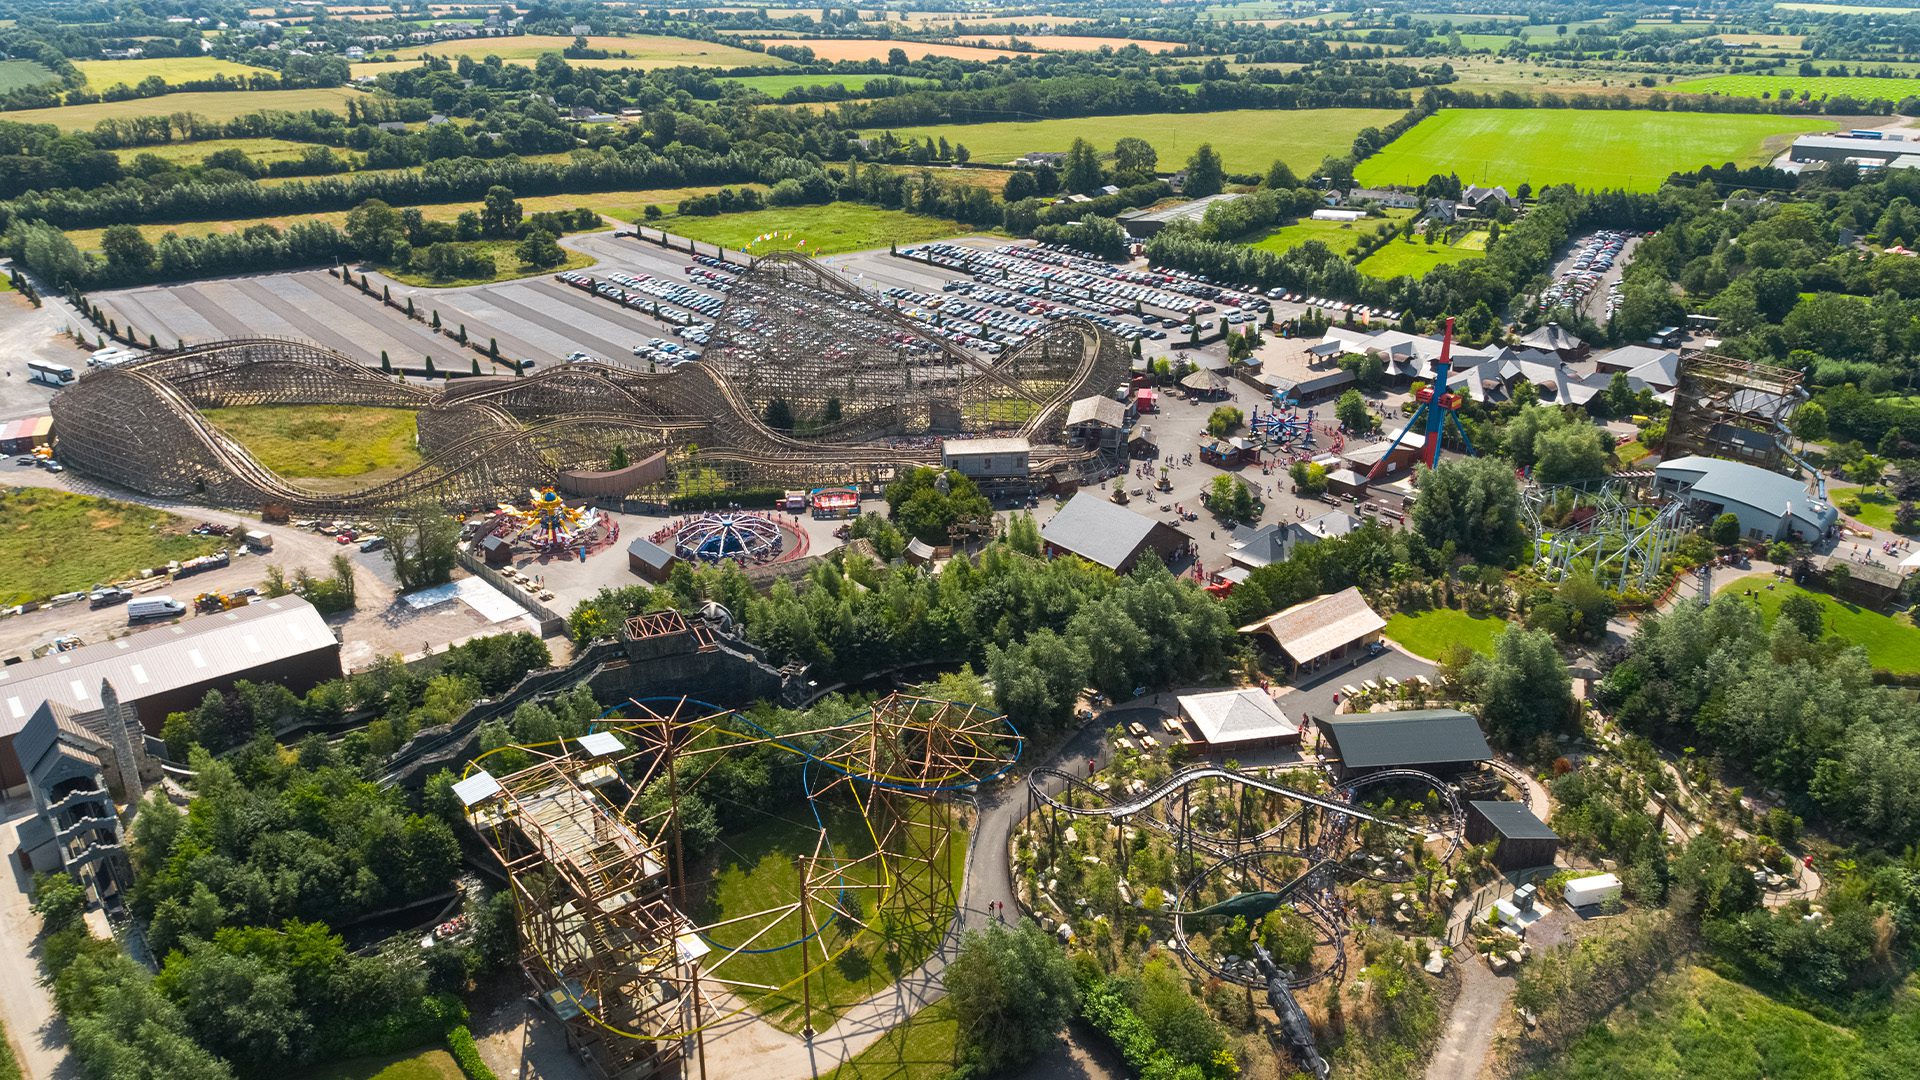 aerial view of emerald park theme park and zoo with carpark and attractions